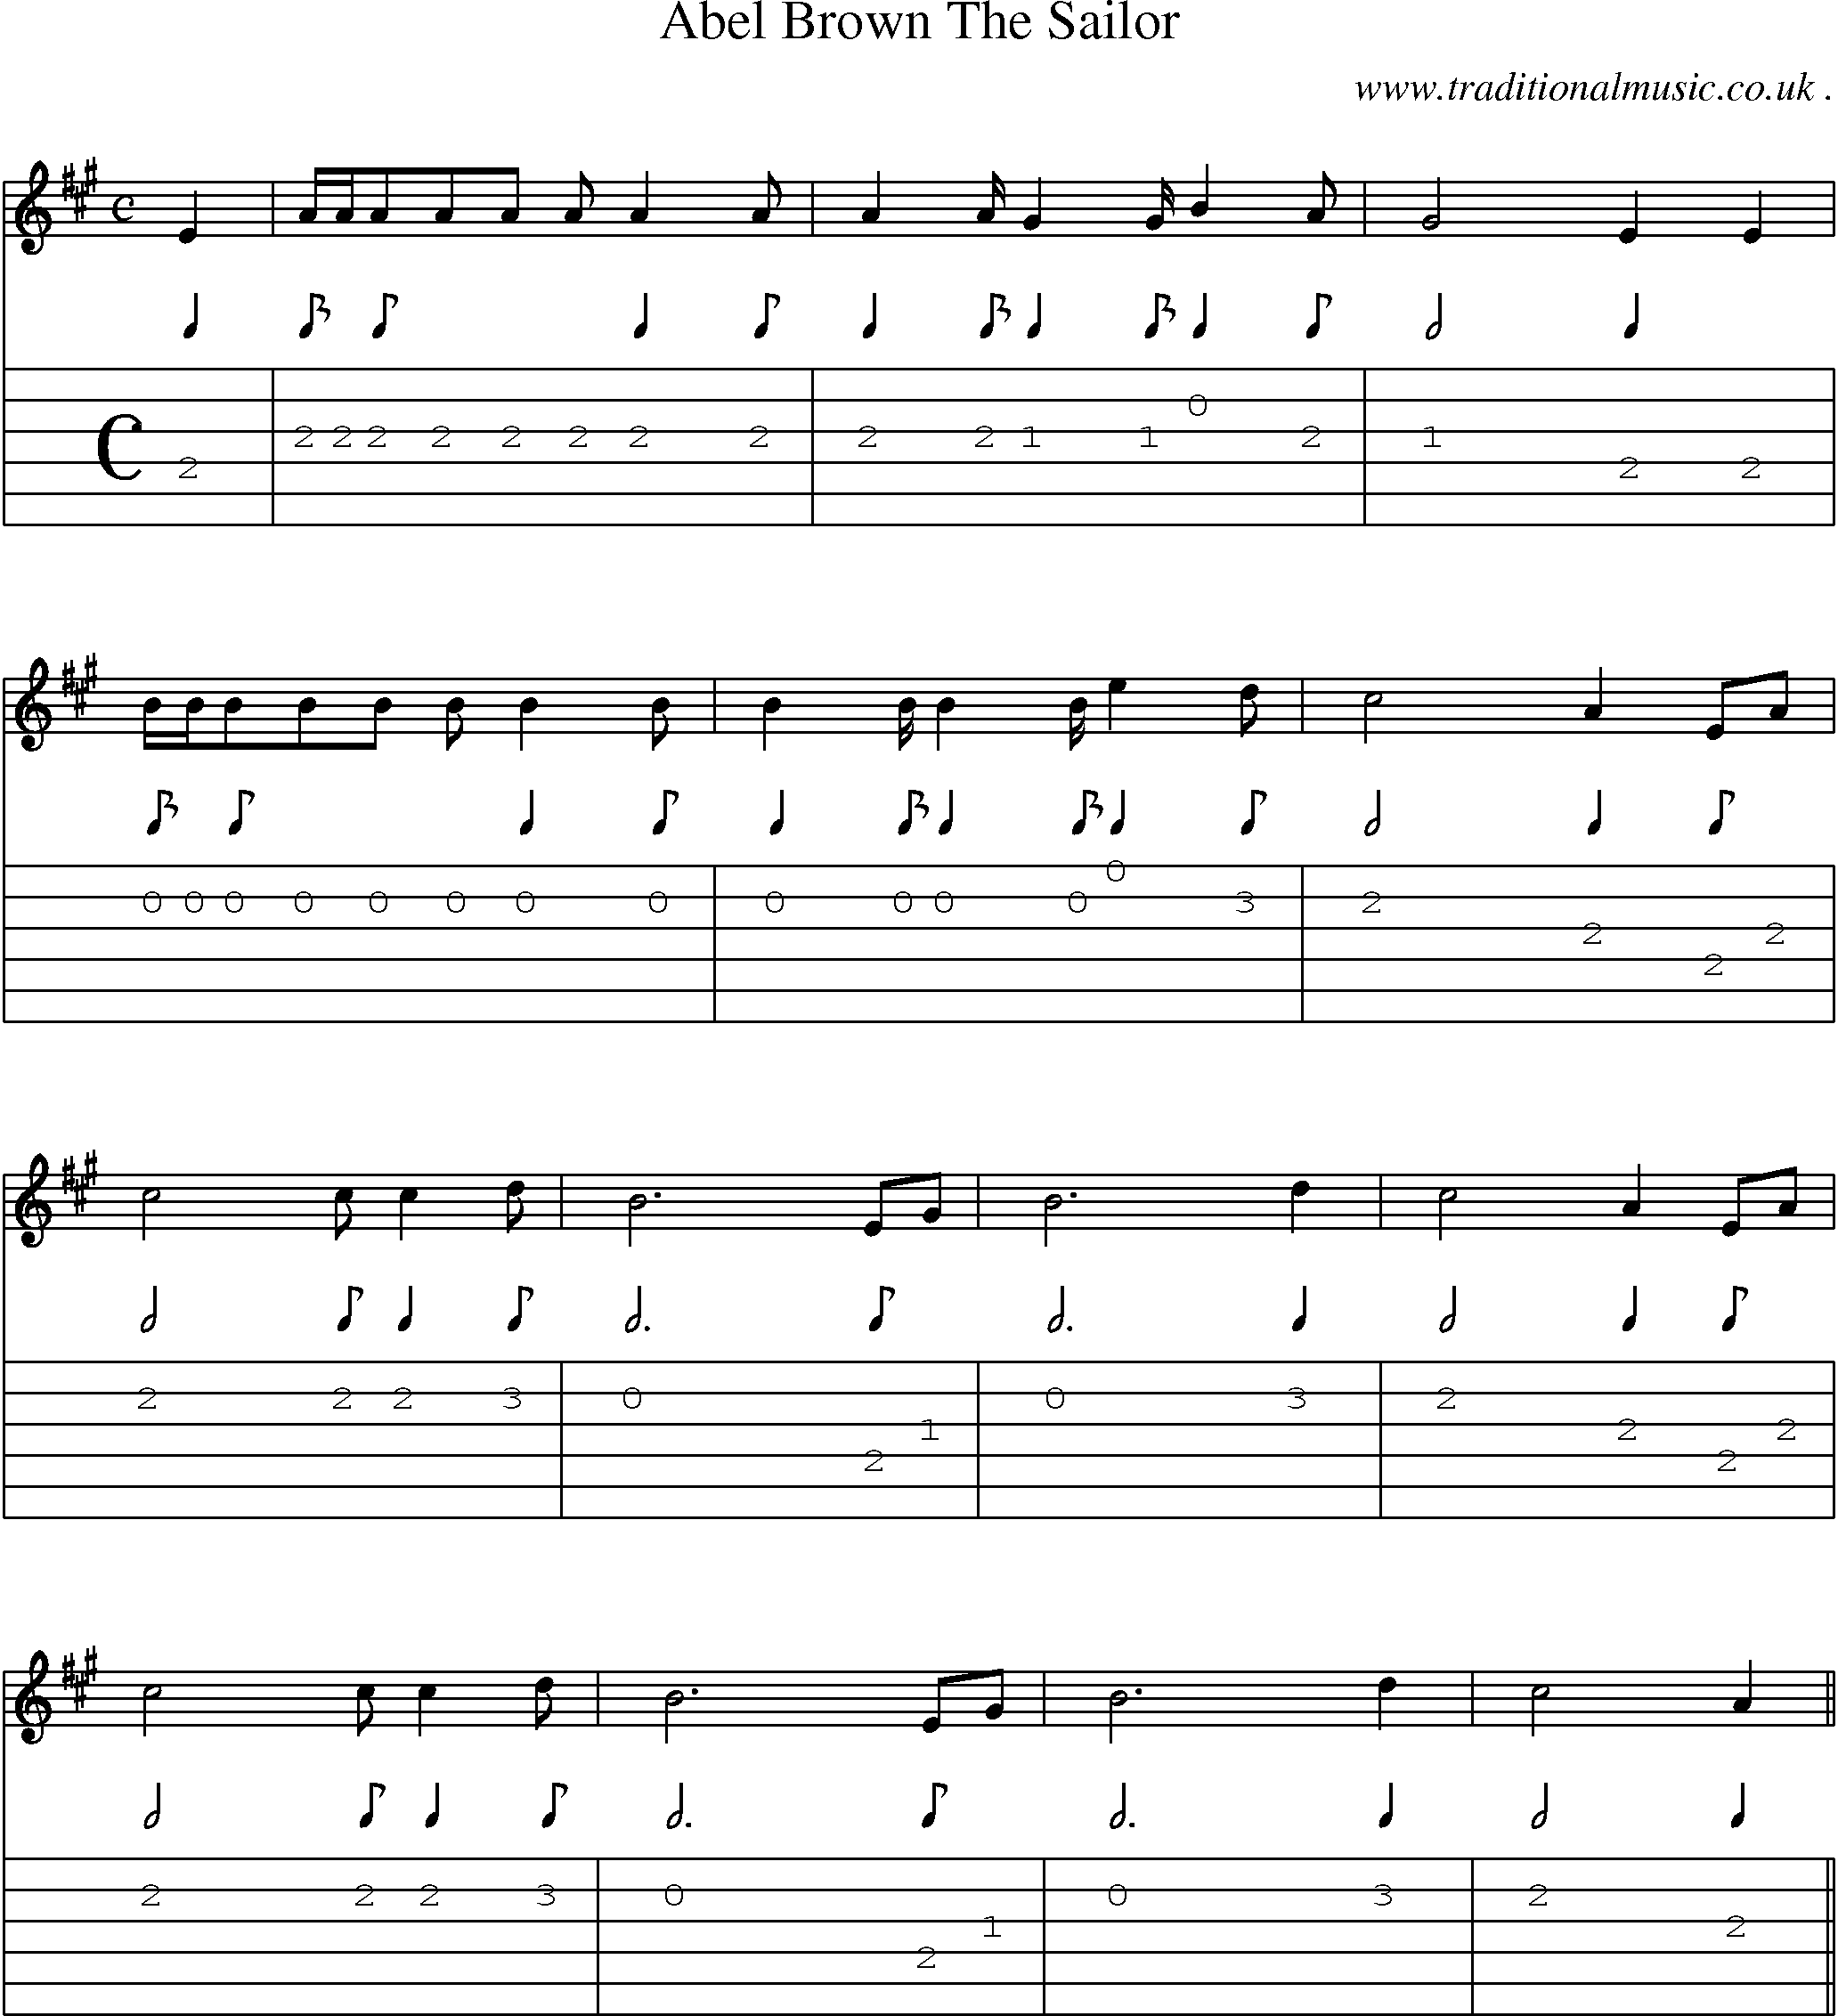 Sheet-Music and Guitar Tabs for Abel Brown The Sailor